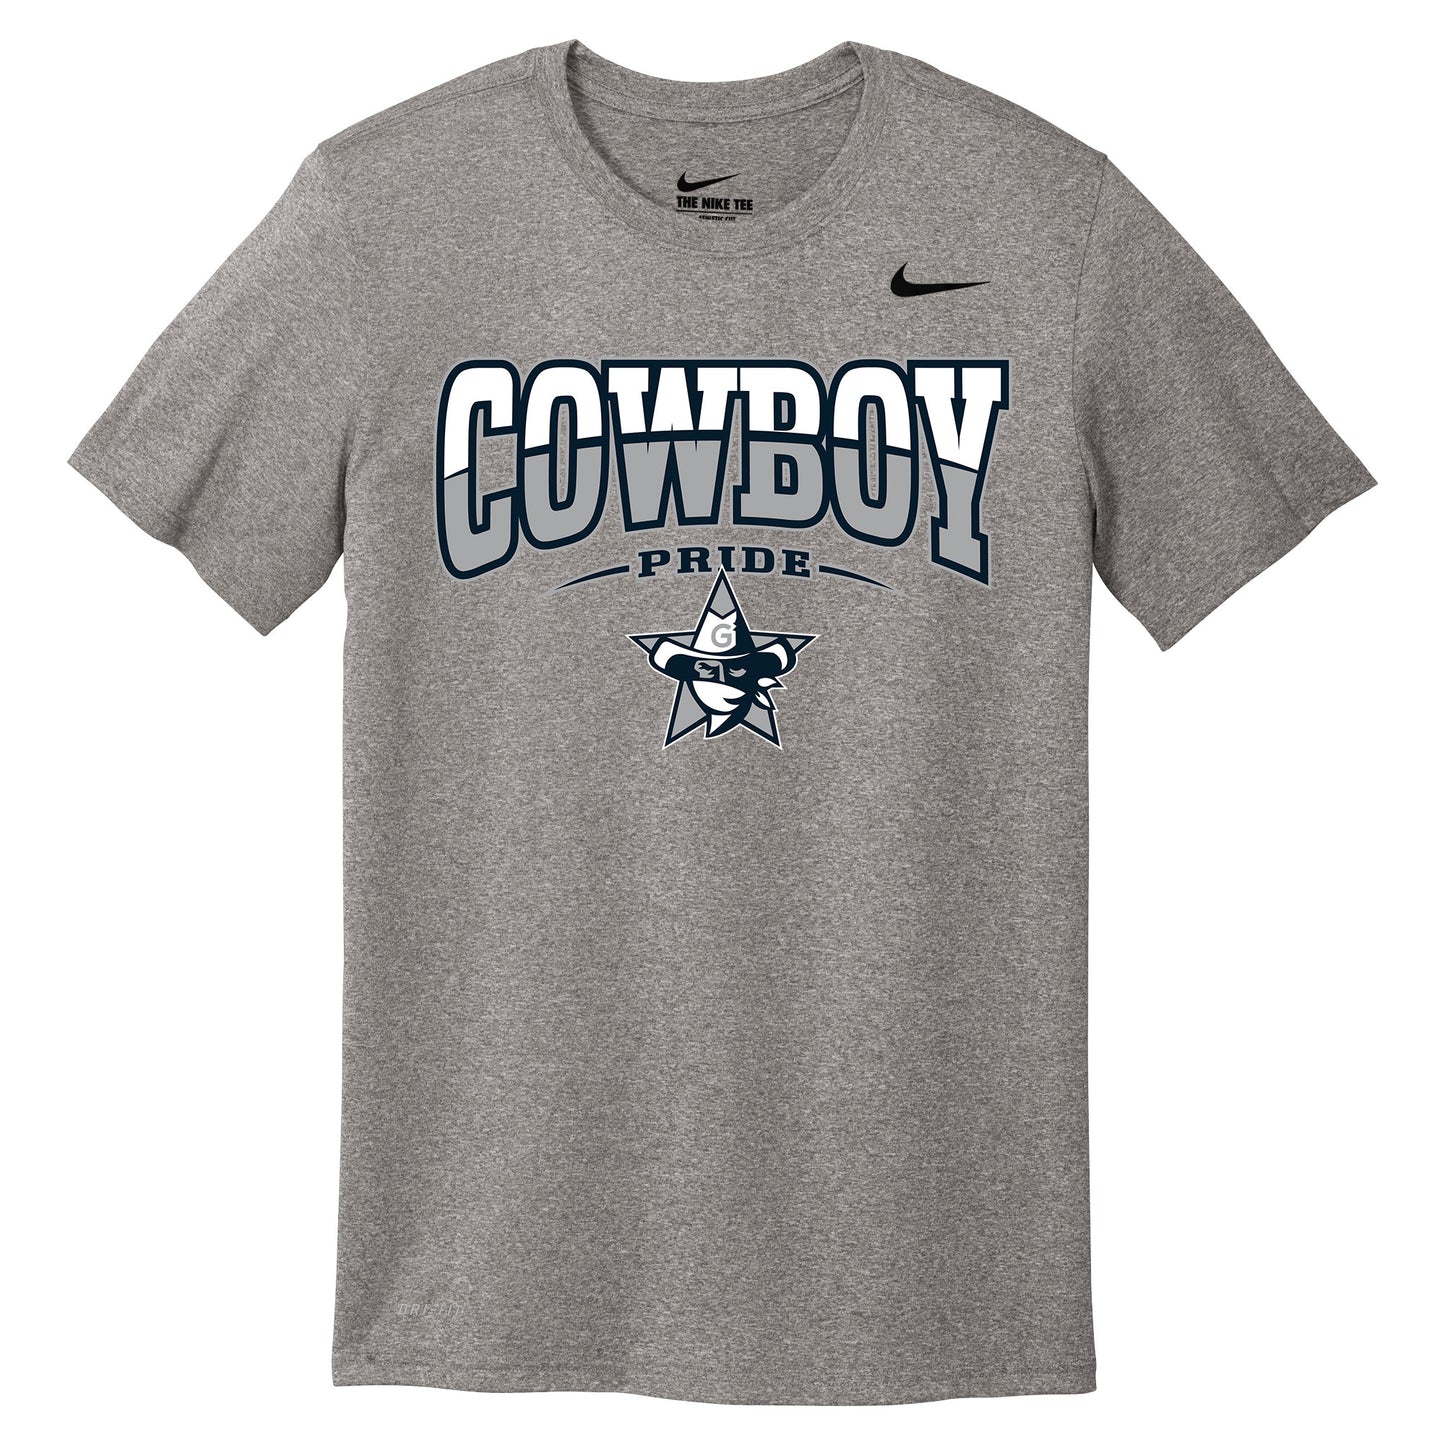 Gaither High School Nike Legend Tee with Printed Cowboys Logo